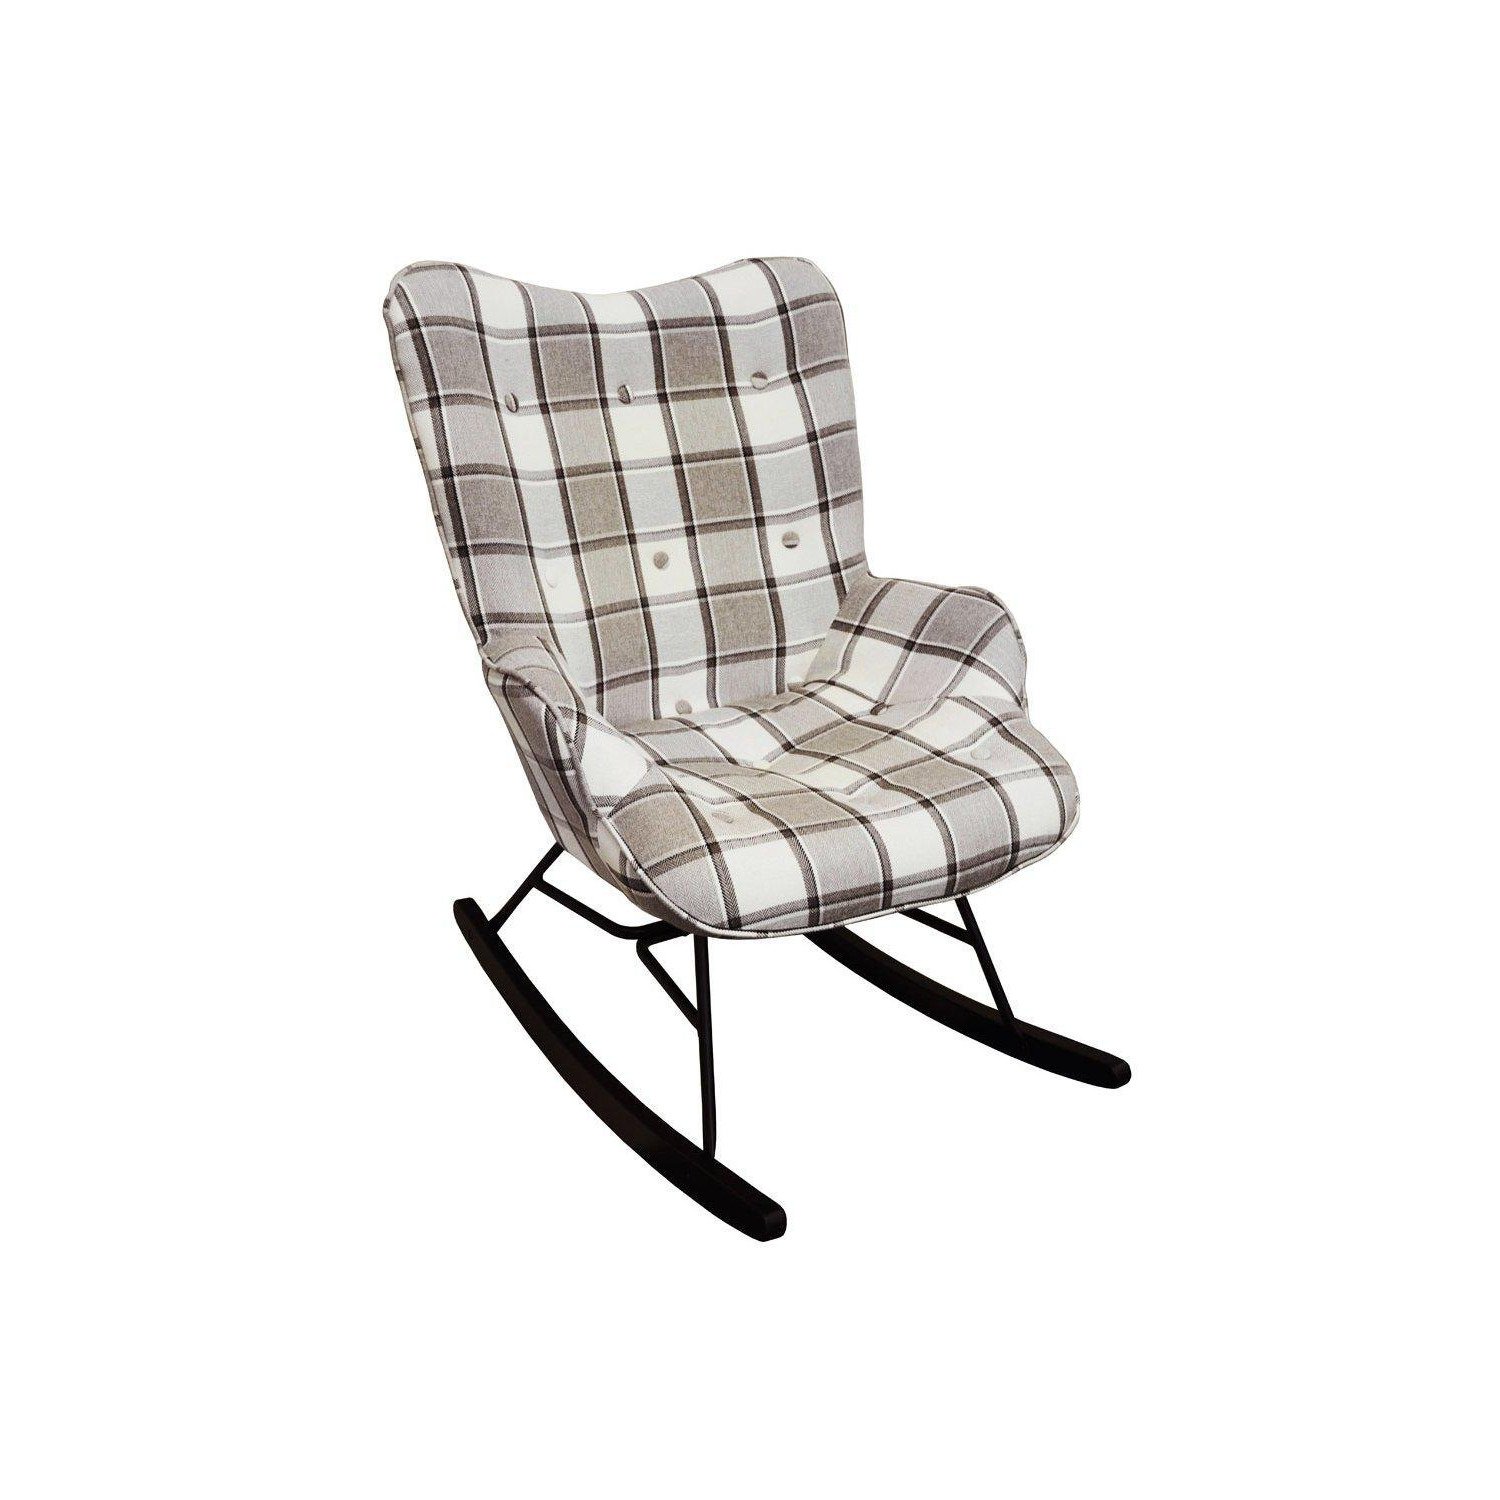 'Check' - Wing Back Rocking  Nursing Chair With Checked Tartan Fabric - Grey  White  Black - image 1